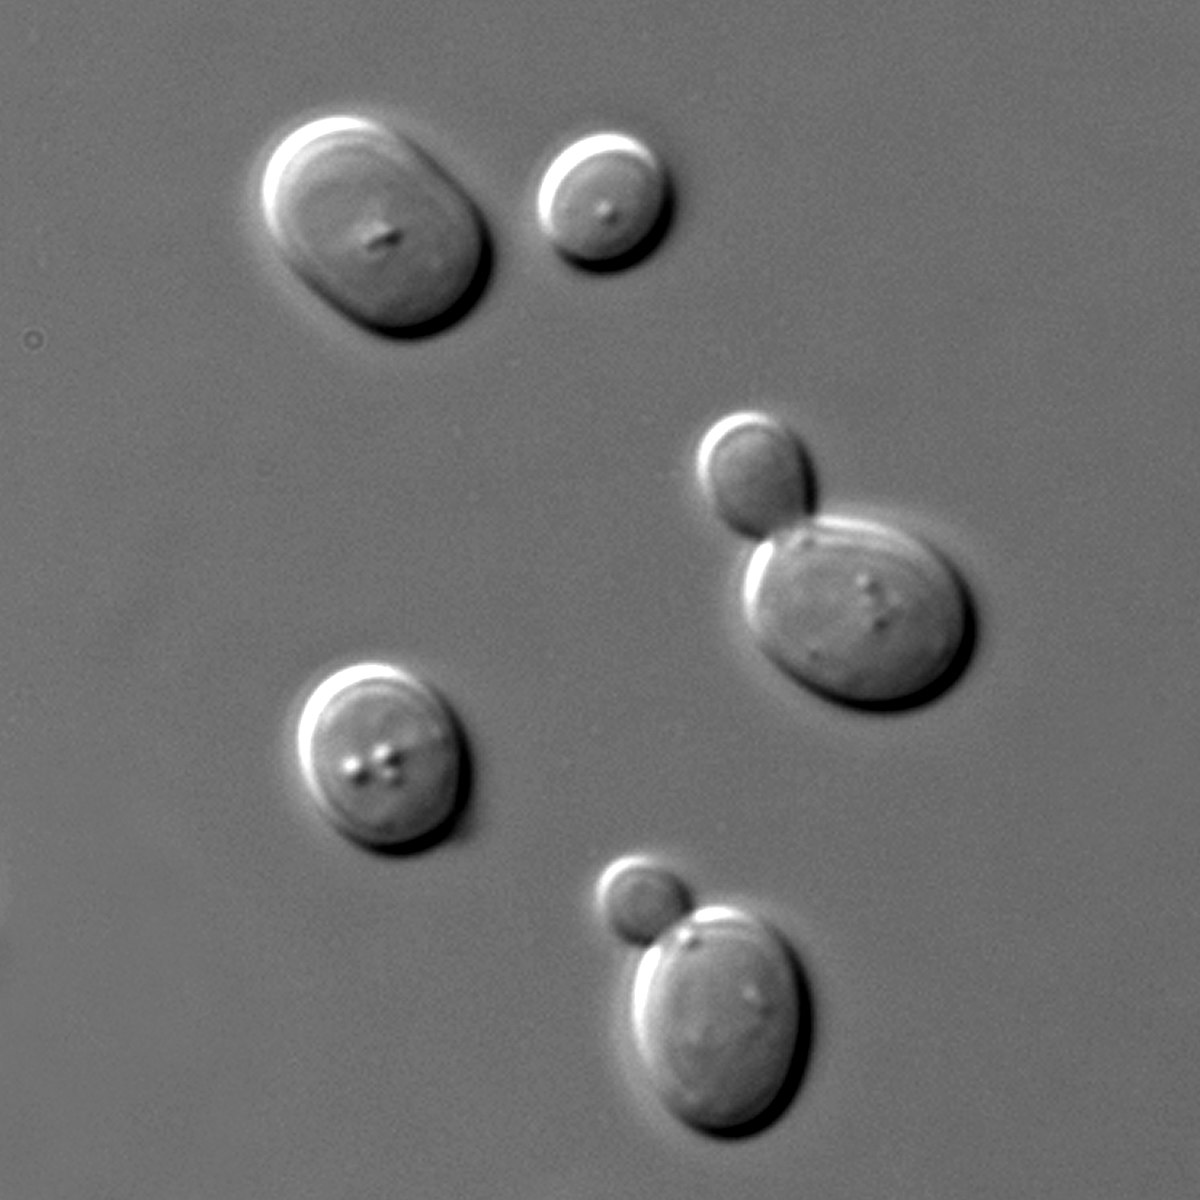 A Microscopy image of yeast, they are small ovular shaped cells, some with lumps within them or a smaller second ovular cell coming off of a side